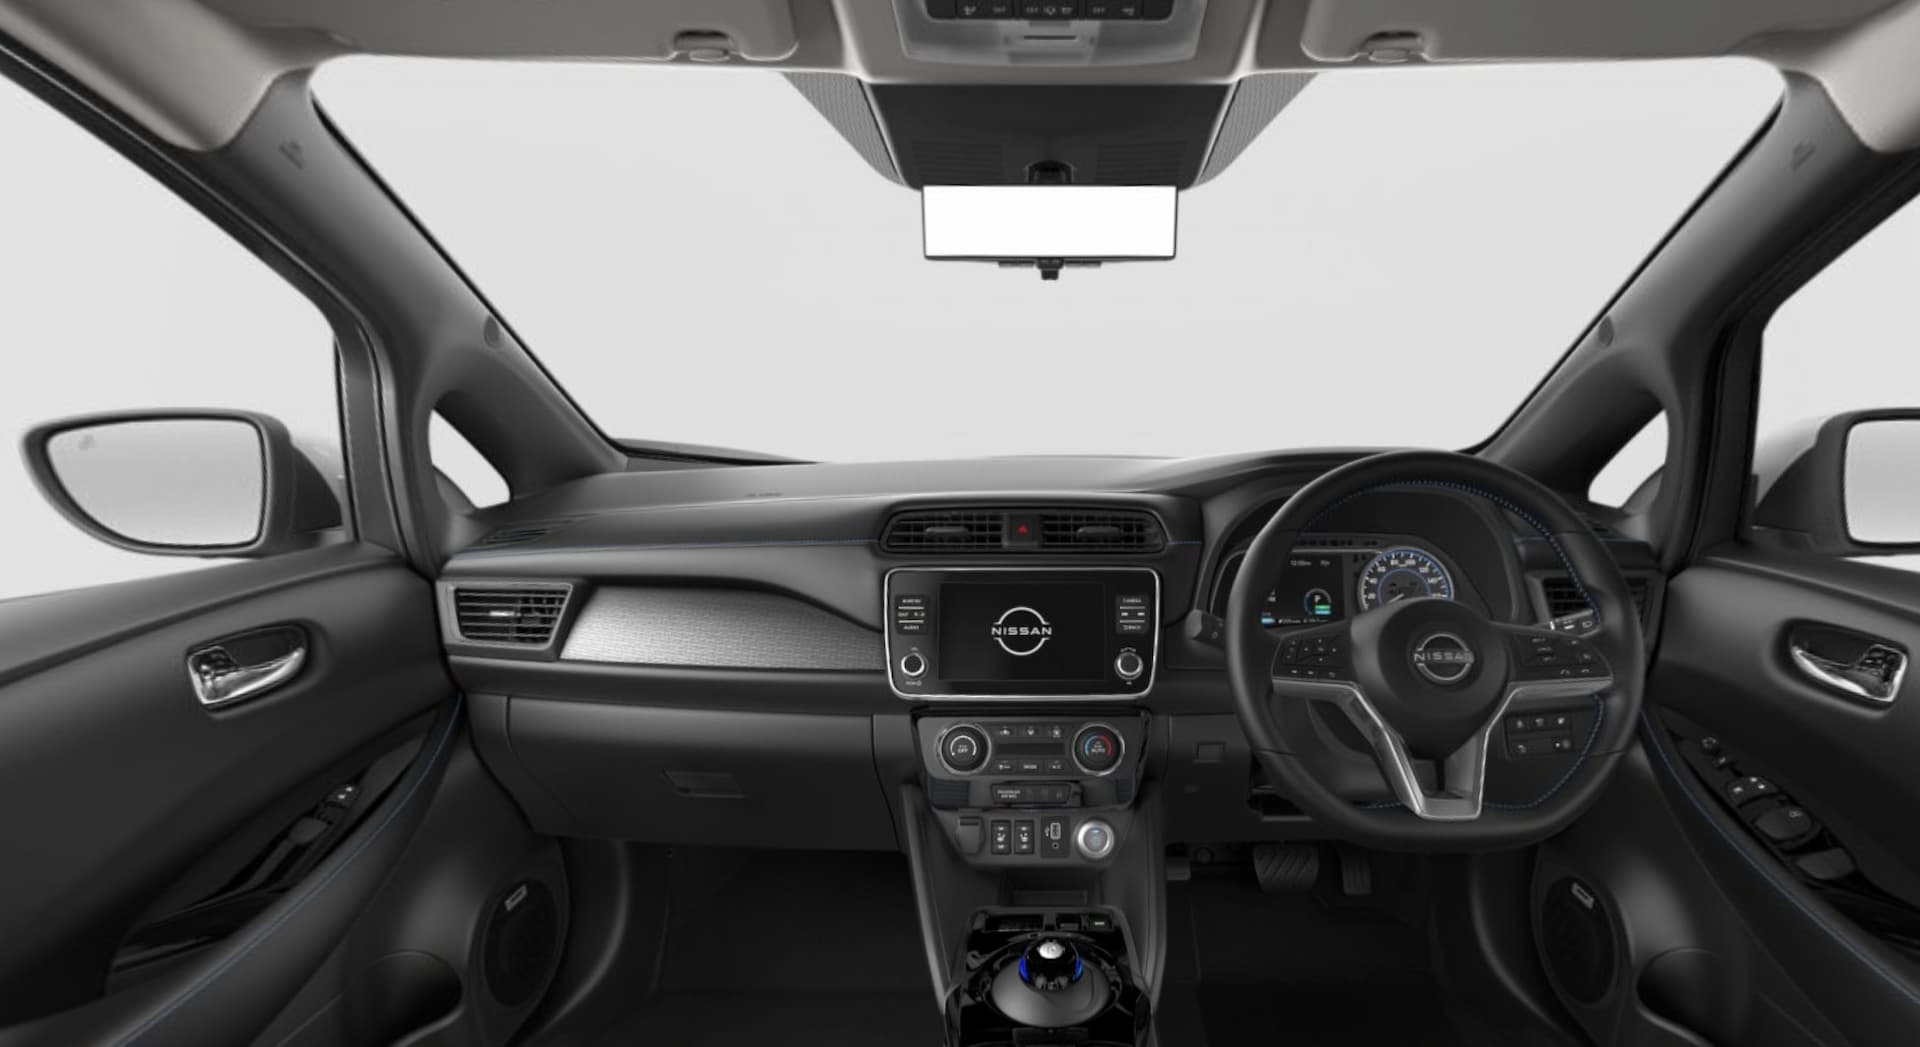 2023 Nissan Leaf exterior and interior